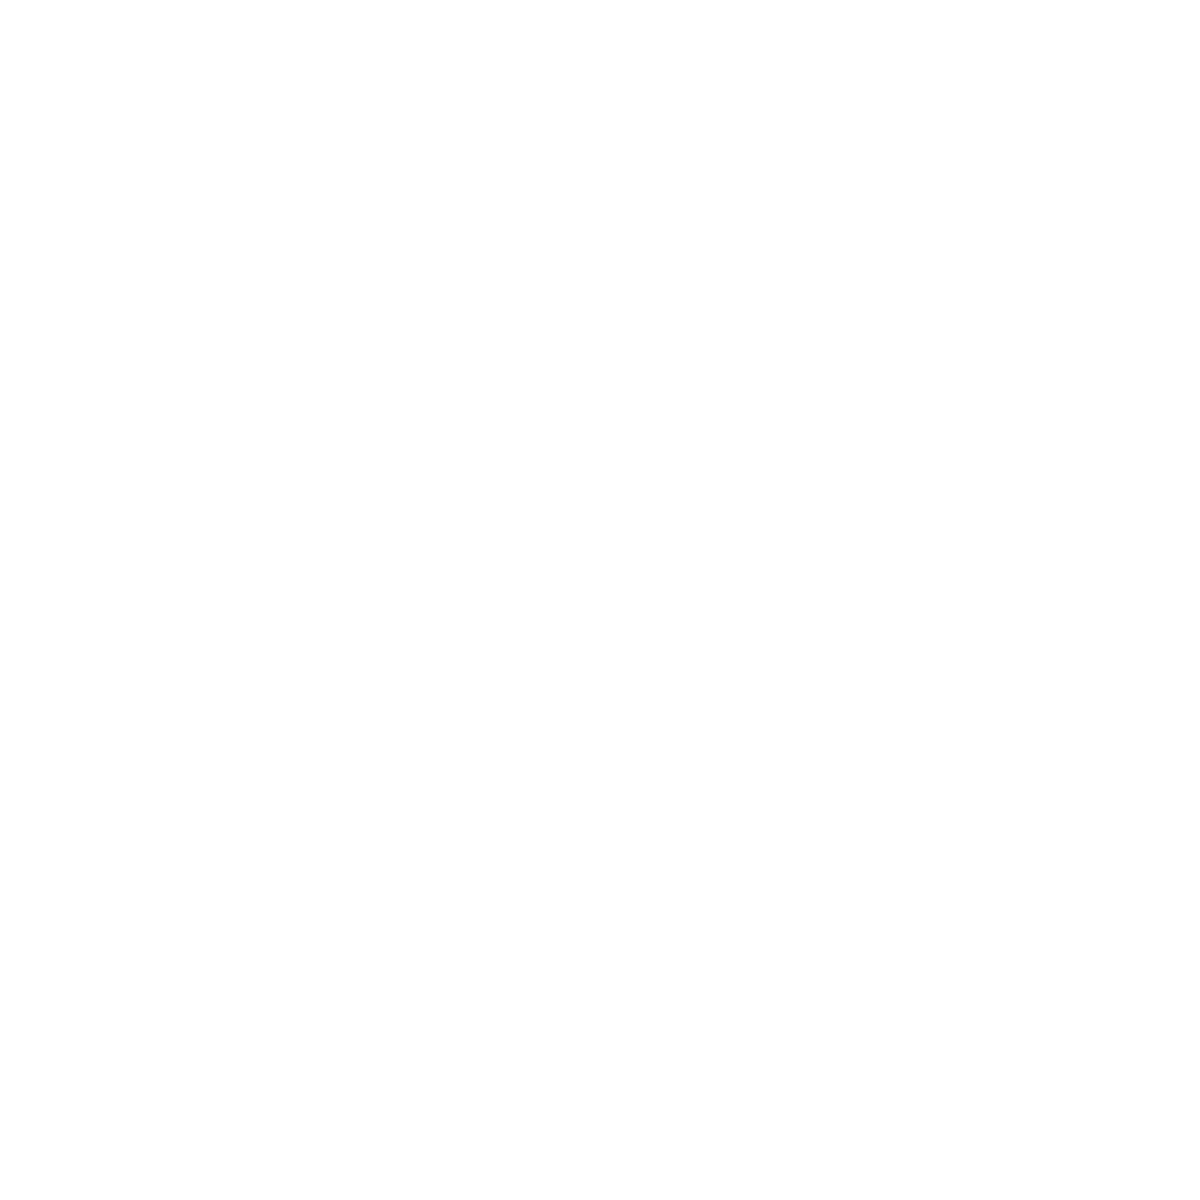 Roadrunners text with mascot - white